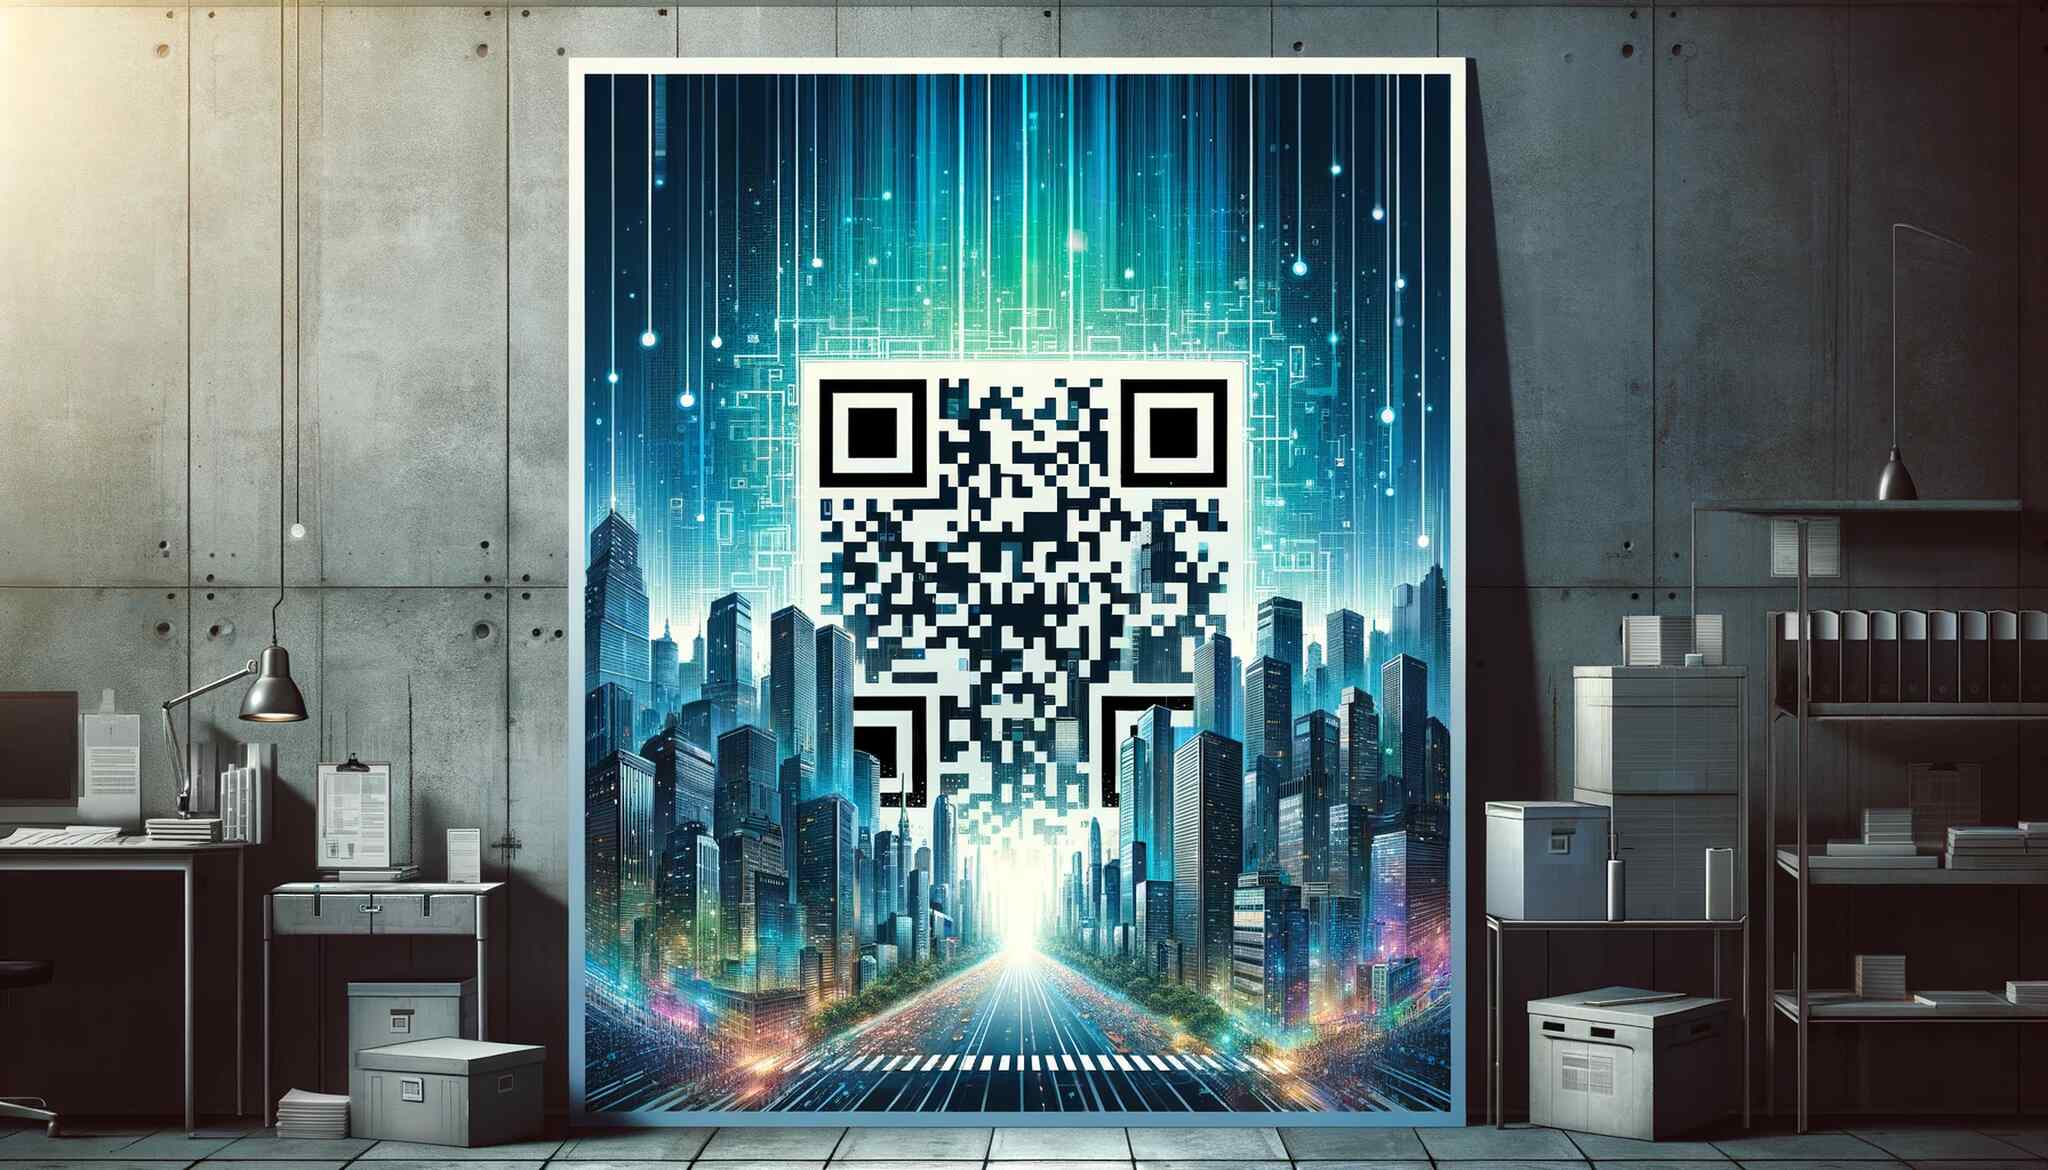 A large poster displaying a cityscape and a QR code